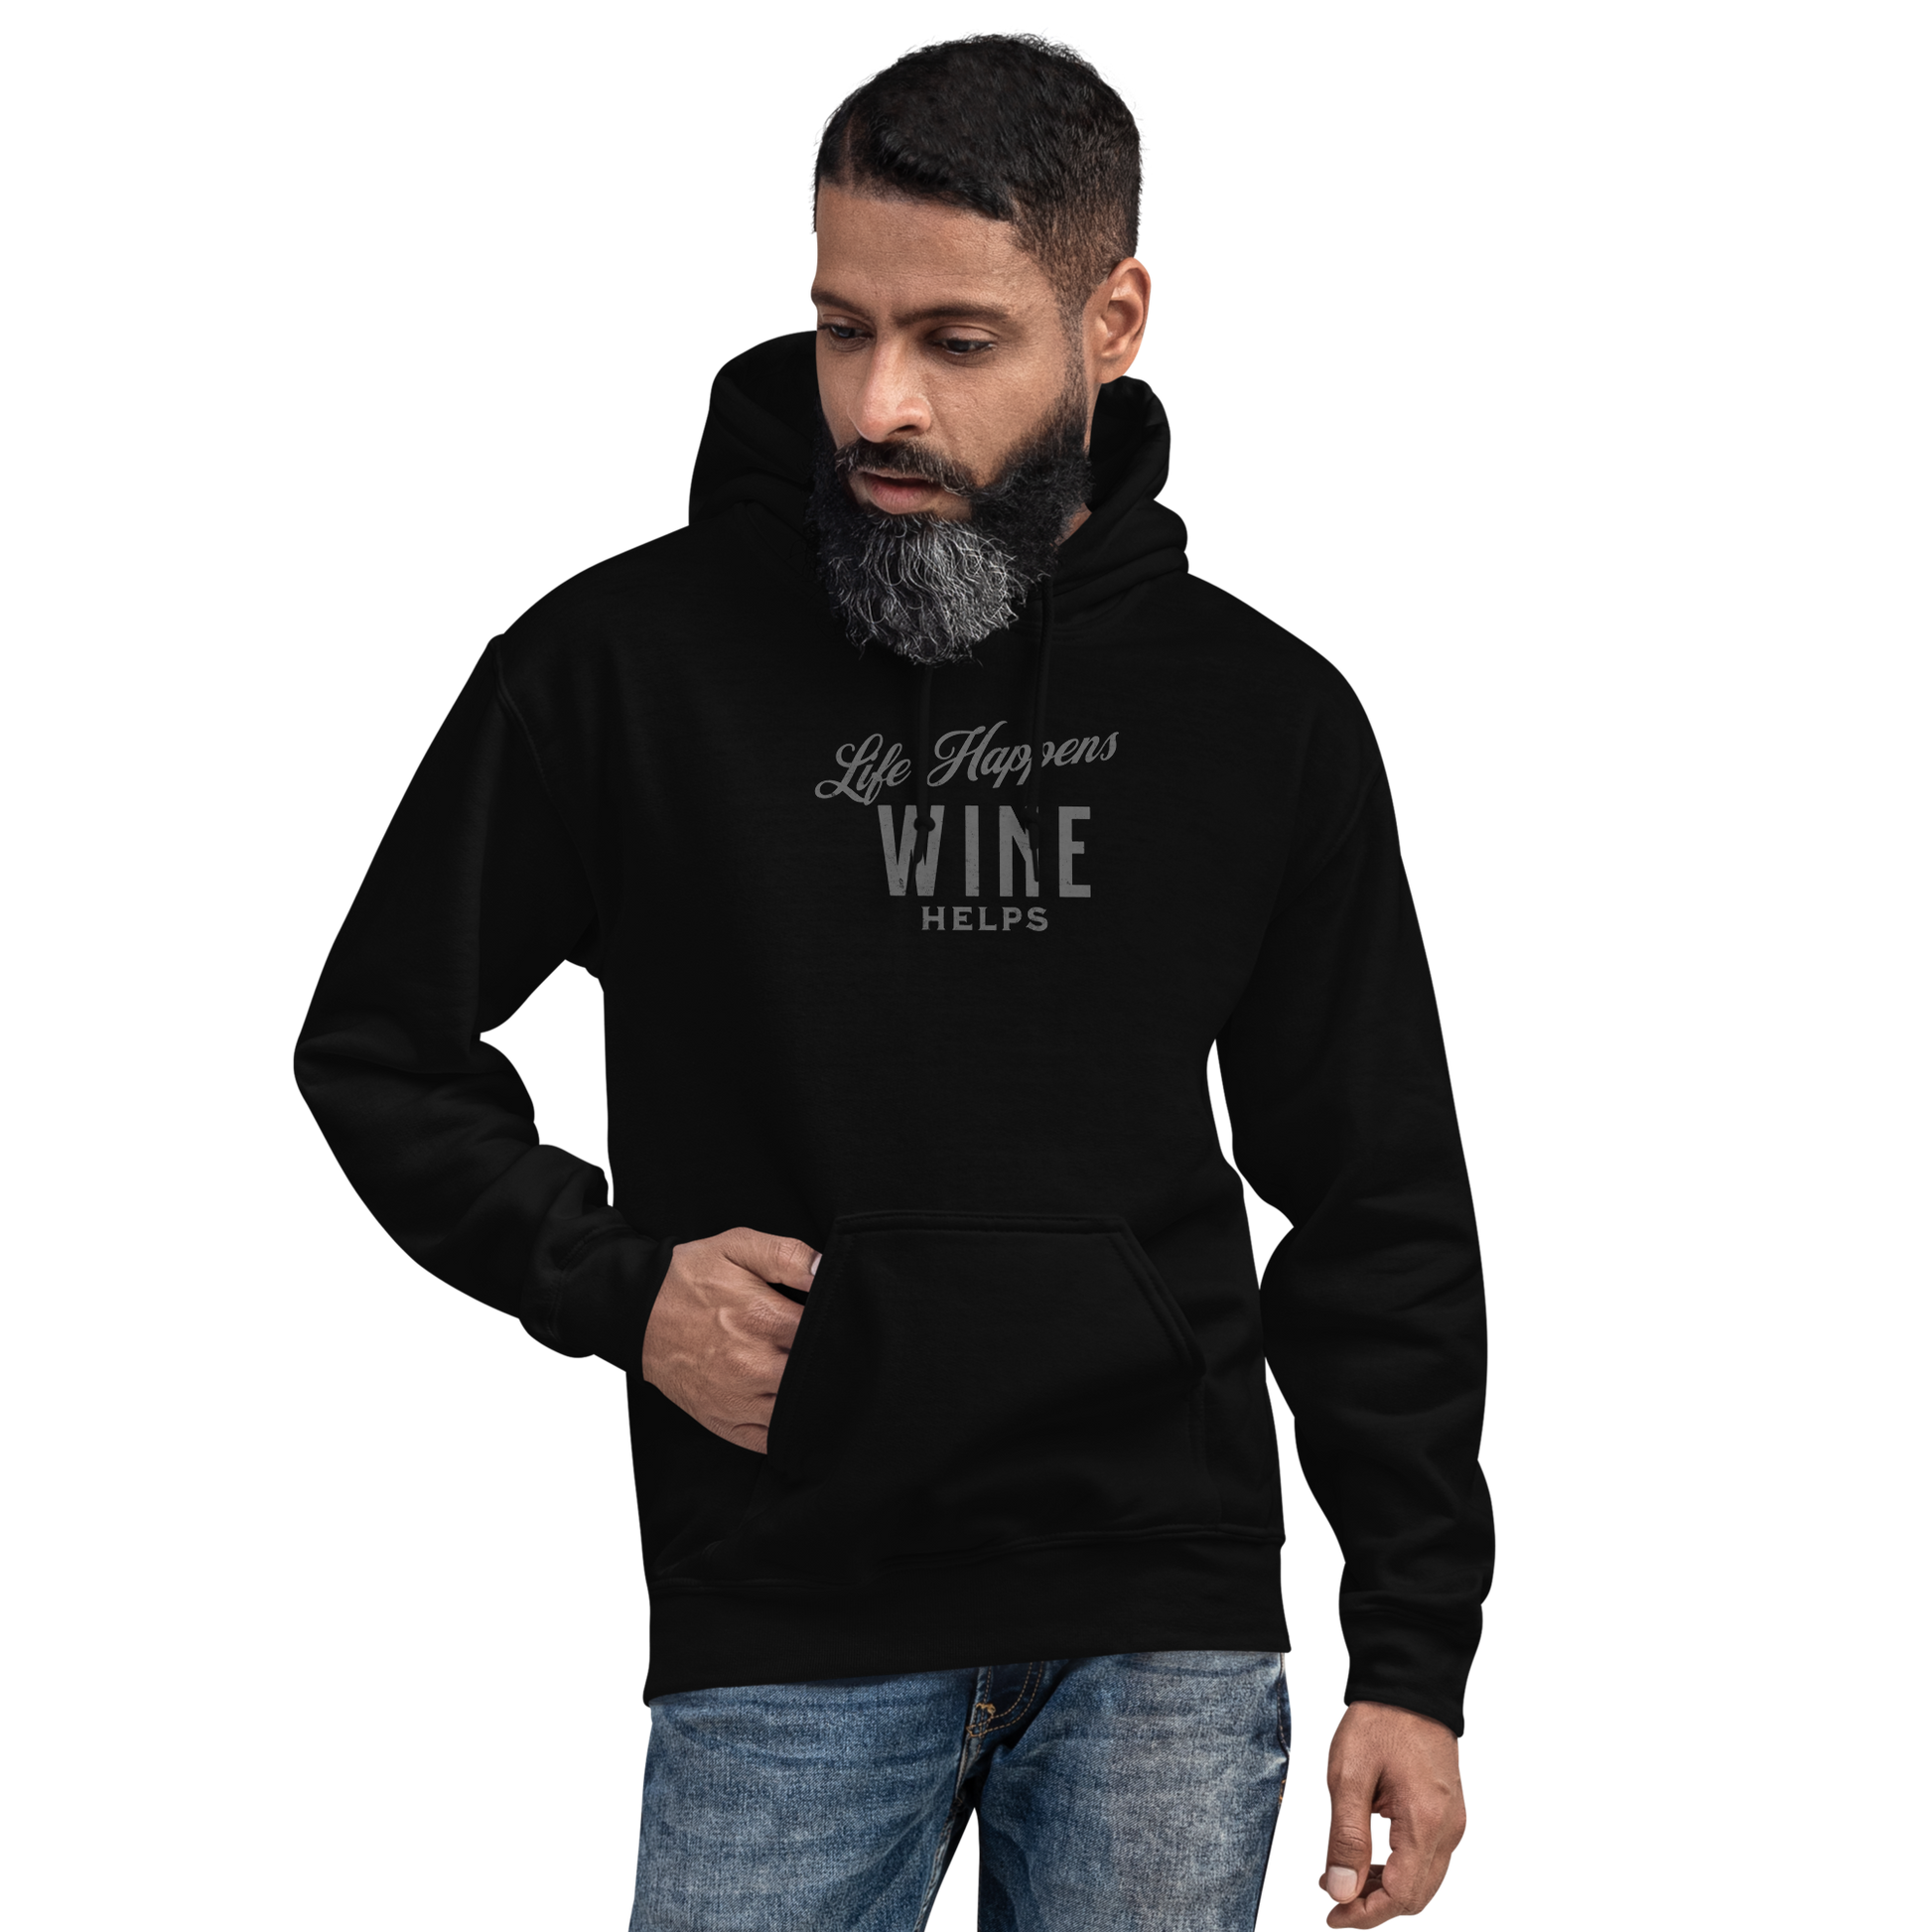 "Life Happens Wine Helps Hoodie - Cozy & Stylish""Find comfort & style in our 'Life Happens Wine Helps' Hoodie. Perfect for cooler evenings with a soft, smooth blend. Catch laughs & cozy vibes."